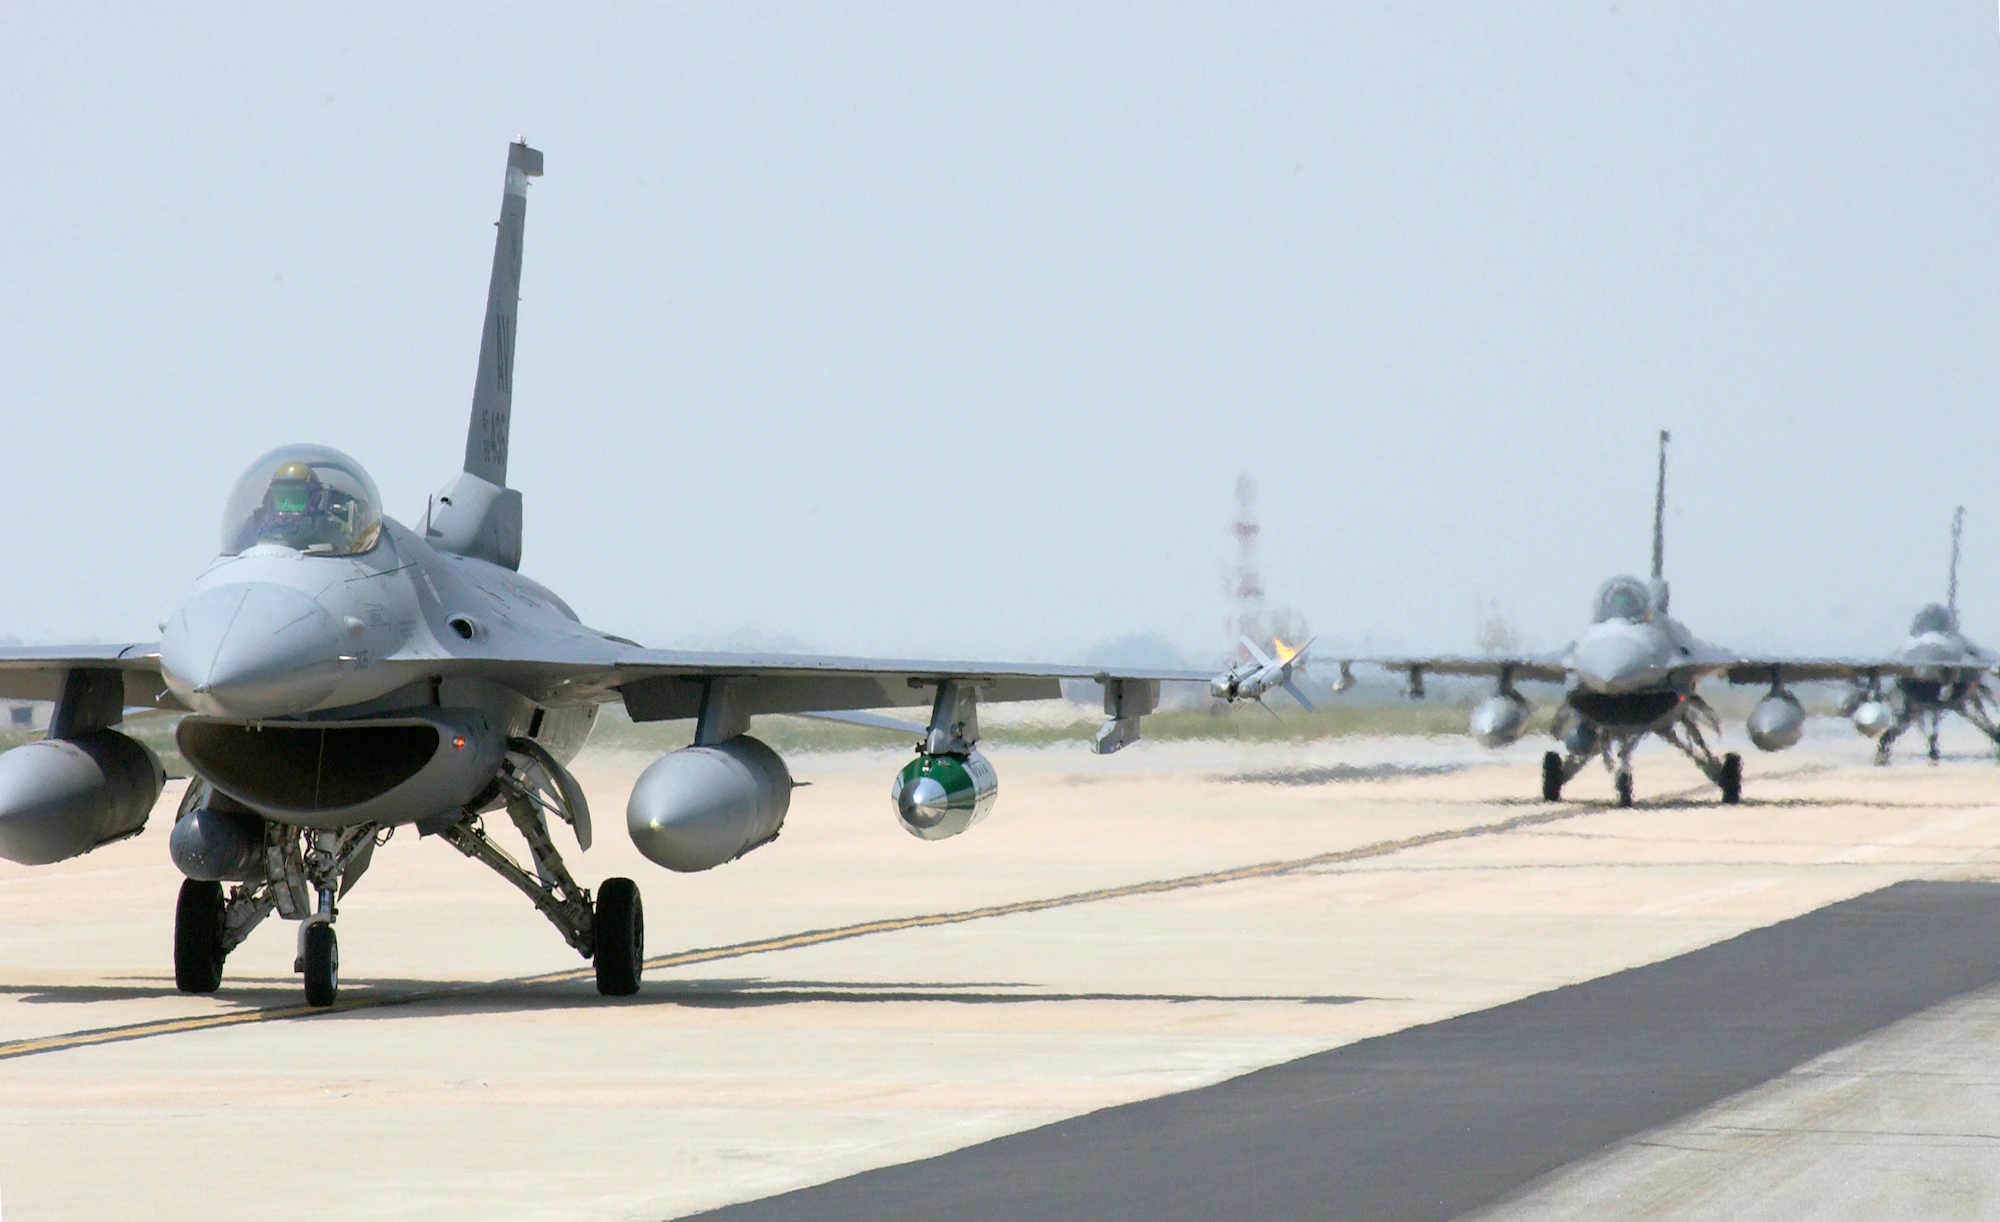 F-15K and KF-16 fighters, Apache and Cobra attack helicopters, KA-1 attack aircraft chased a flock of birds in South Korea, mistaking them for DPRK drones